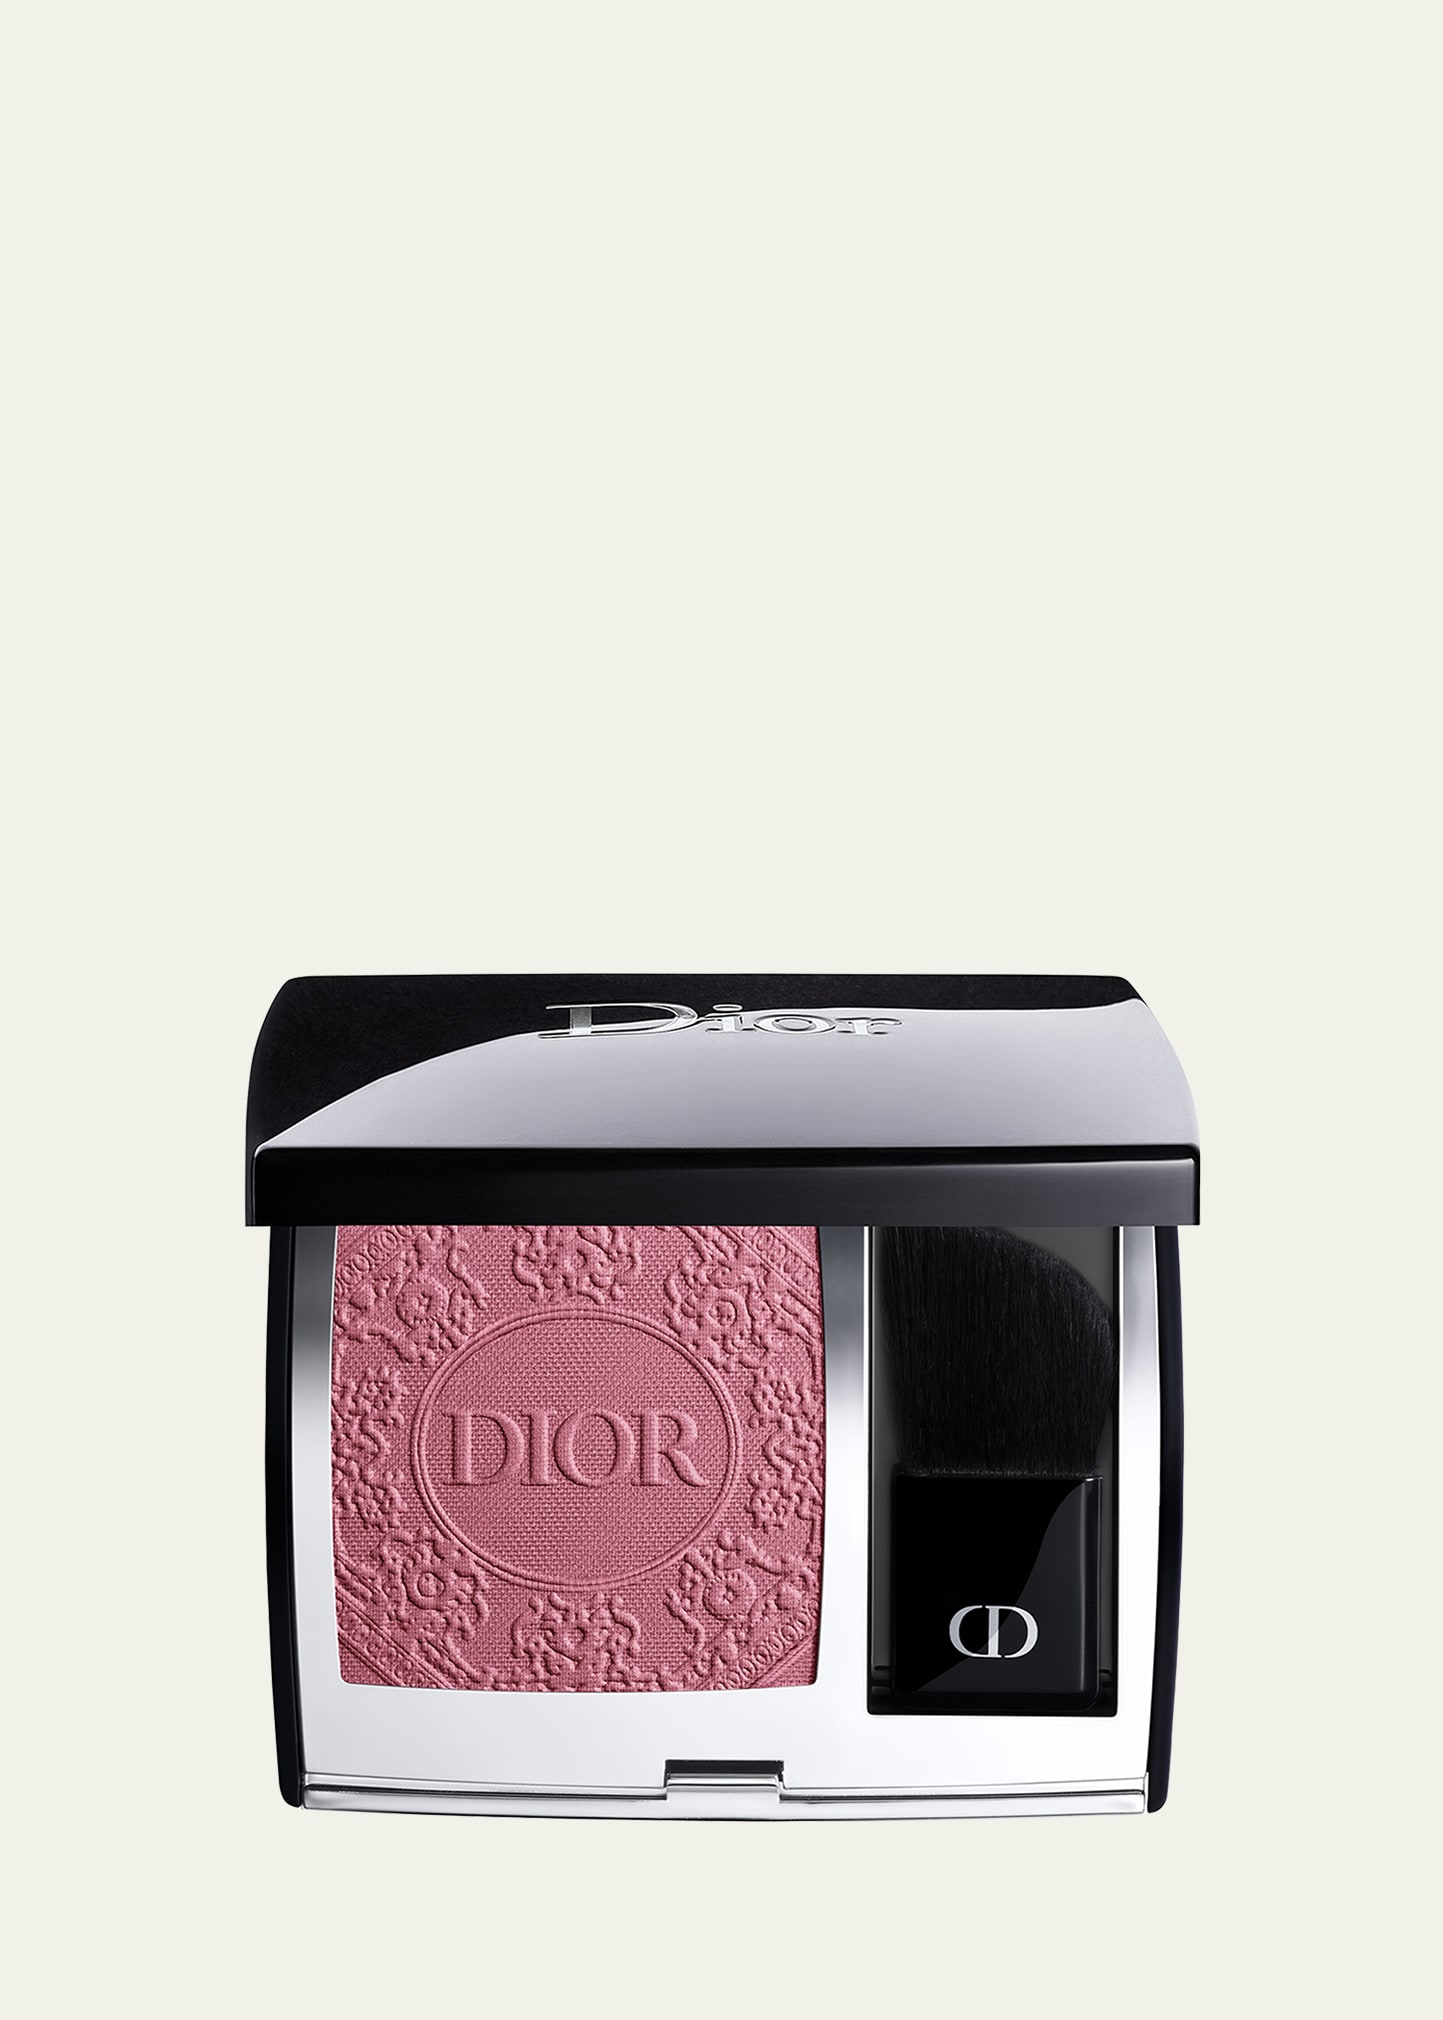 DIOR LIMITED EDITION DIOR ROUGE BLUSH